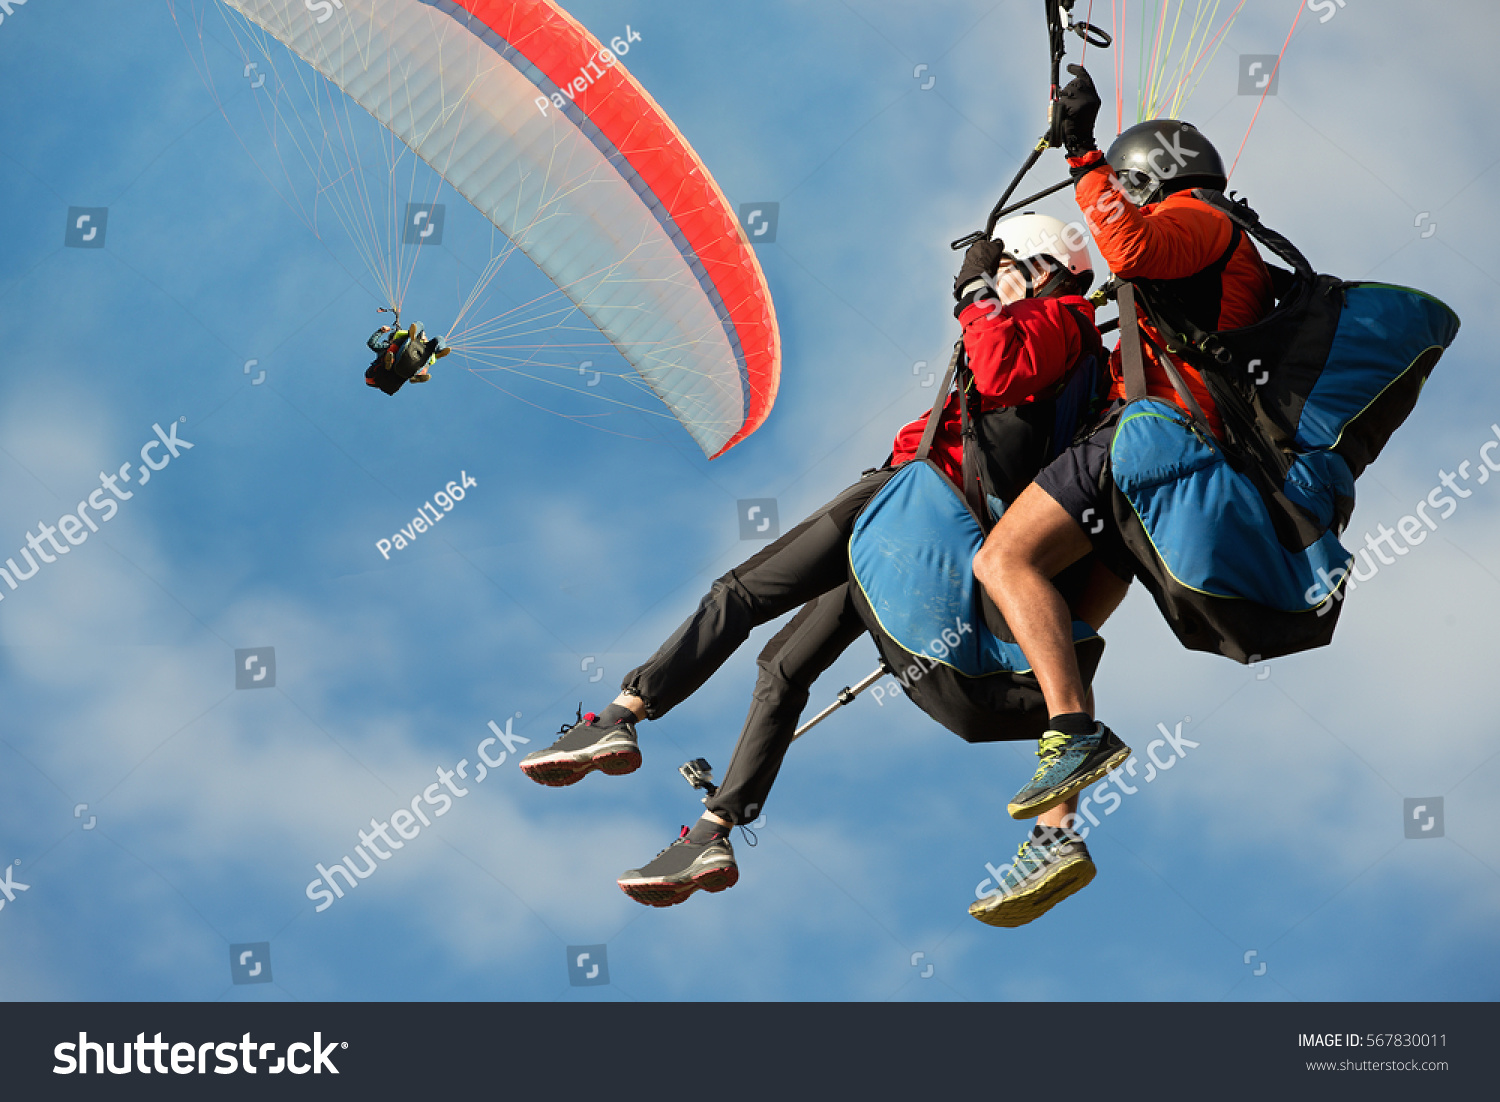 Two paraglider tandem fly against the blue sky,tandem paragliding guided by a pilot #567830011